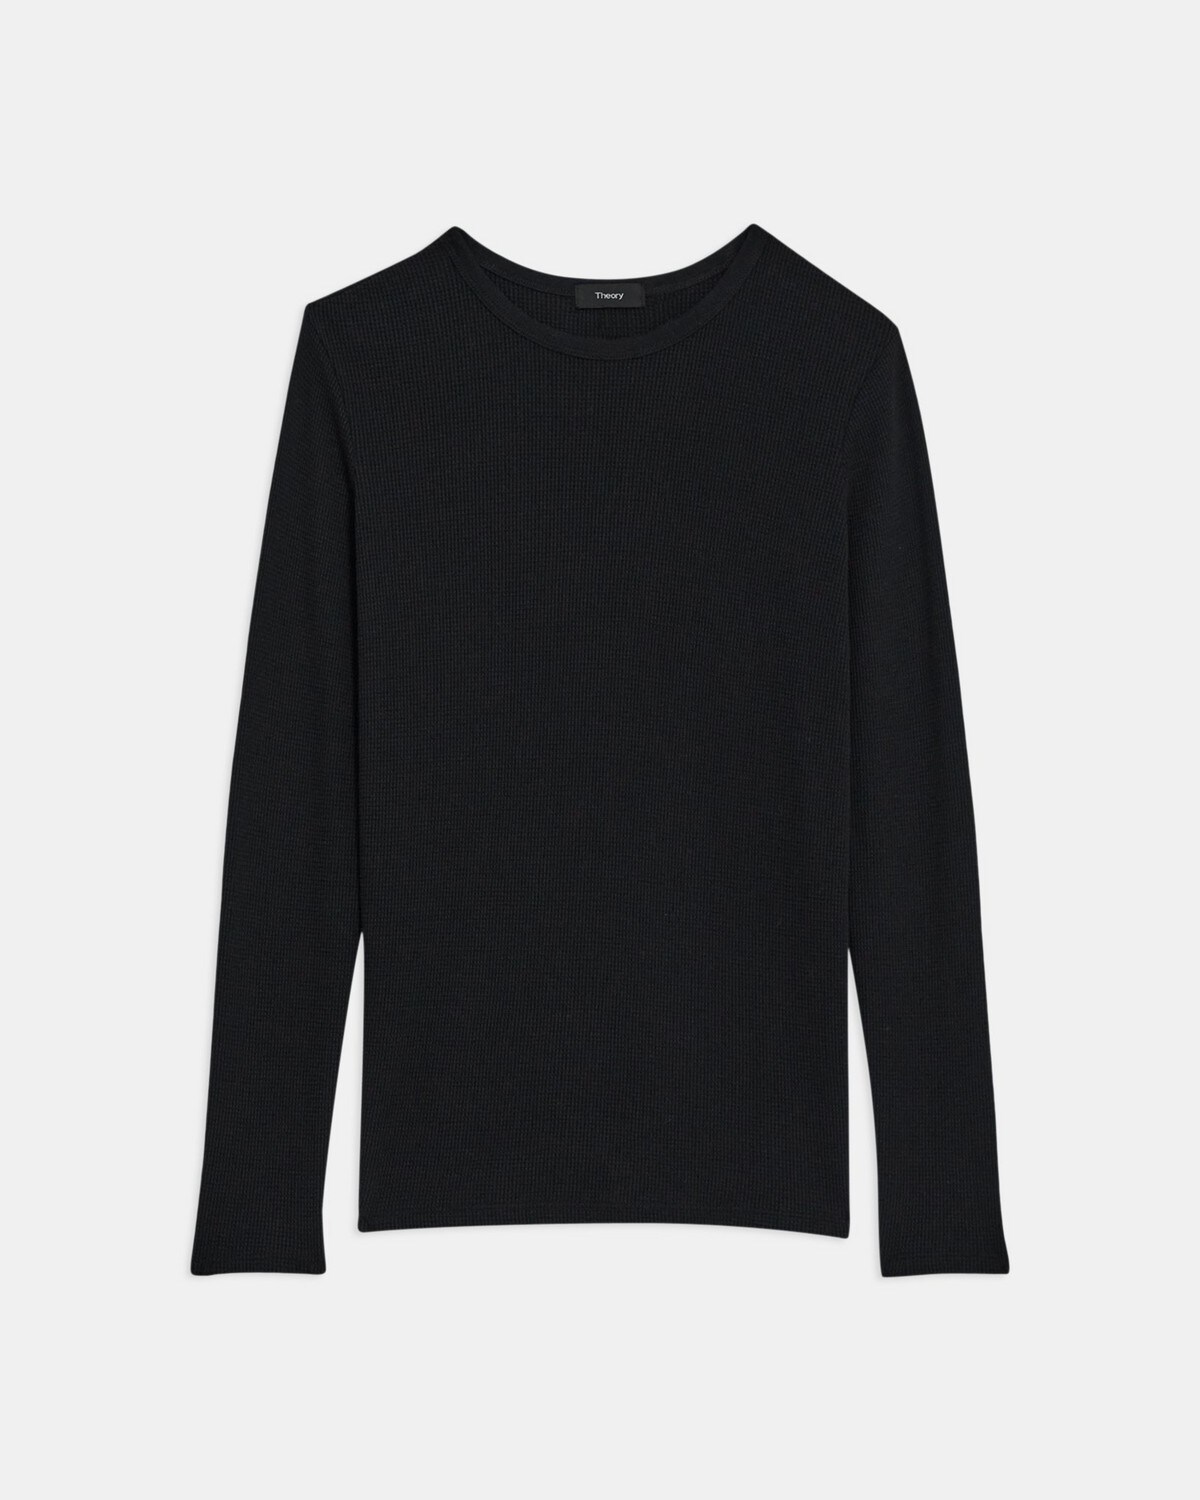 Long-Sleeve Tee in Waffle-Knit Cotton